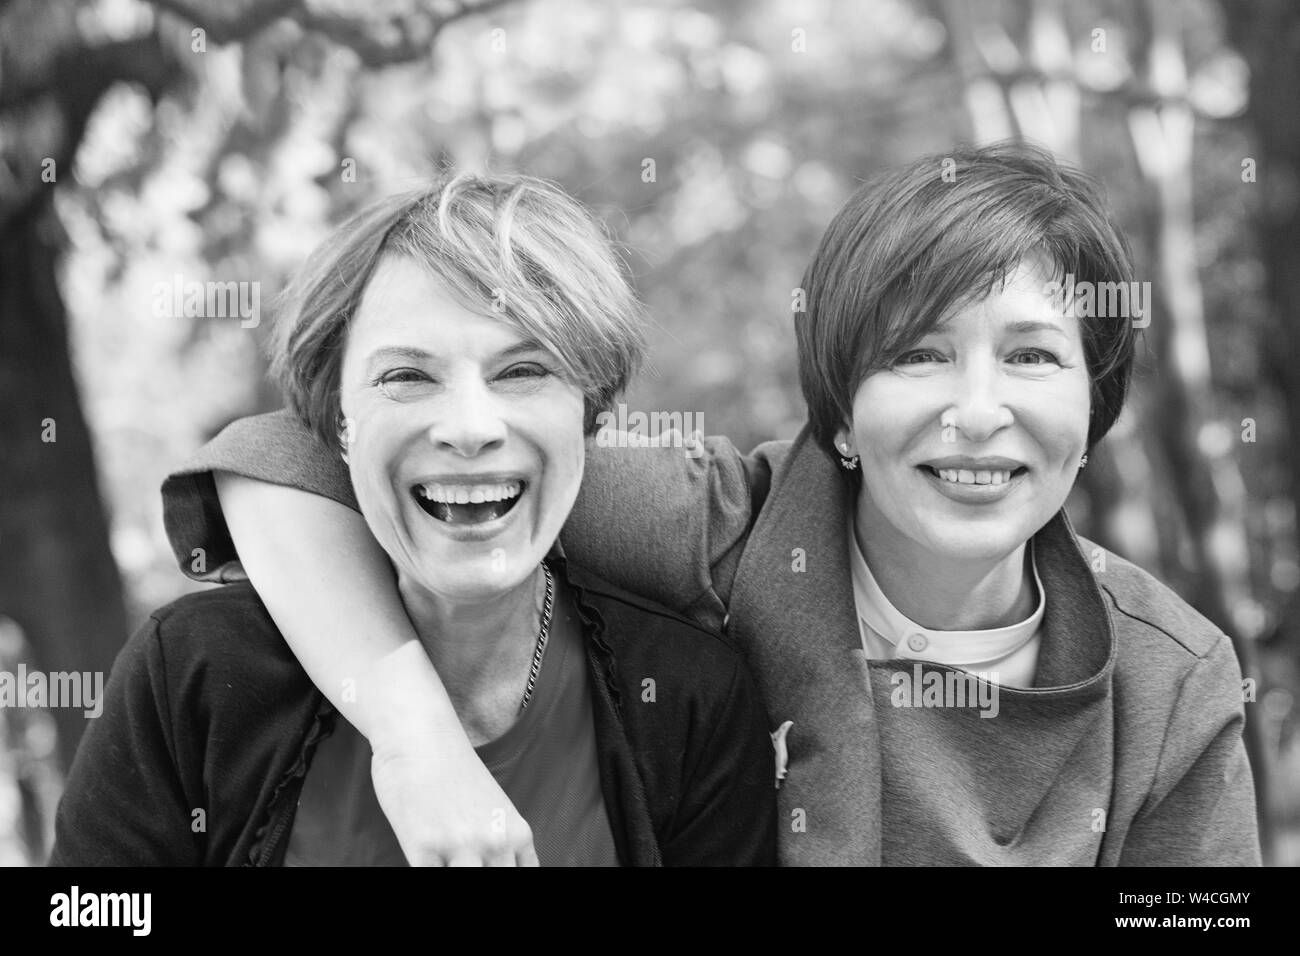 Laughing women hugging and having fun in park, tonned black and white retro portrait Stock Photo